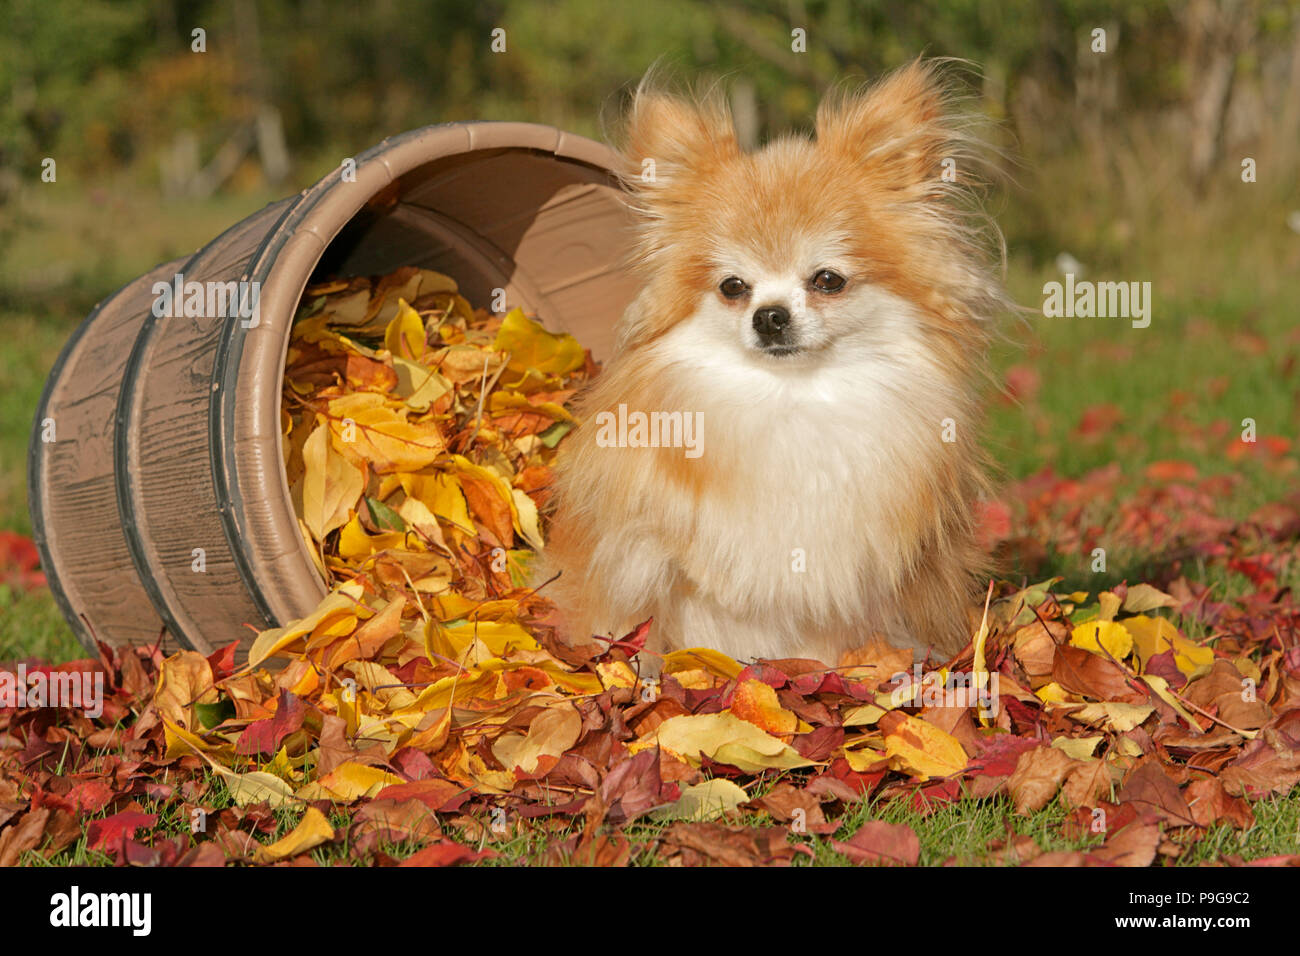 Pomeranian Dog sitting by barrel on pile of leaves in autumn colors Stock Photo